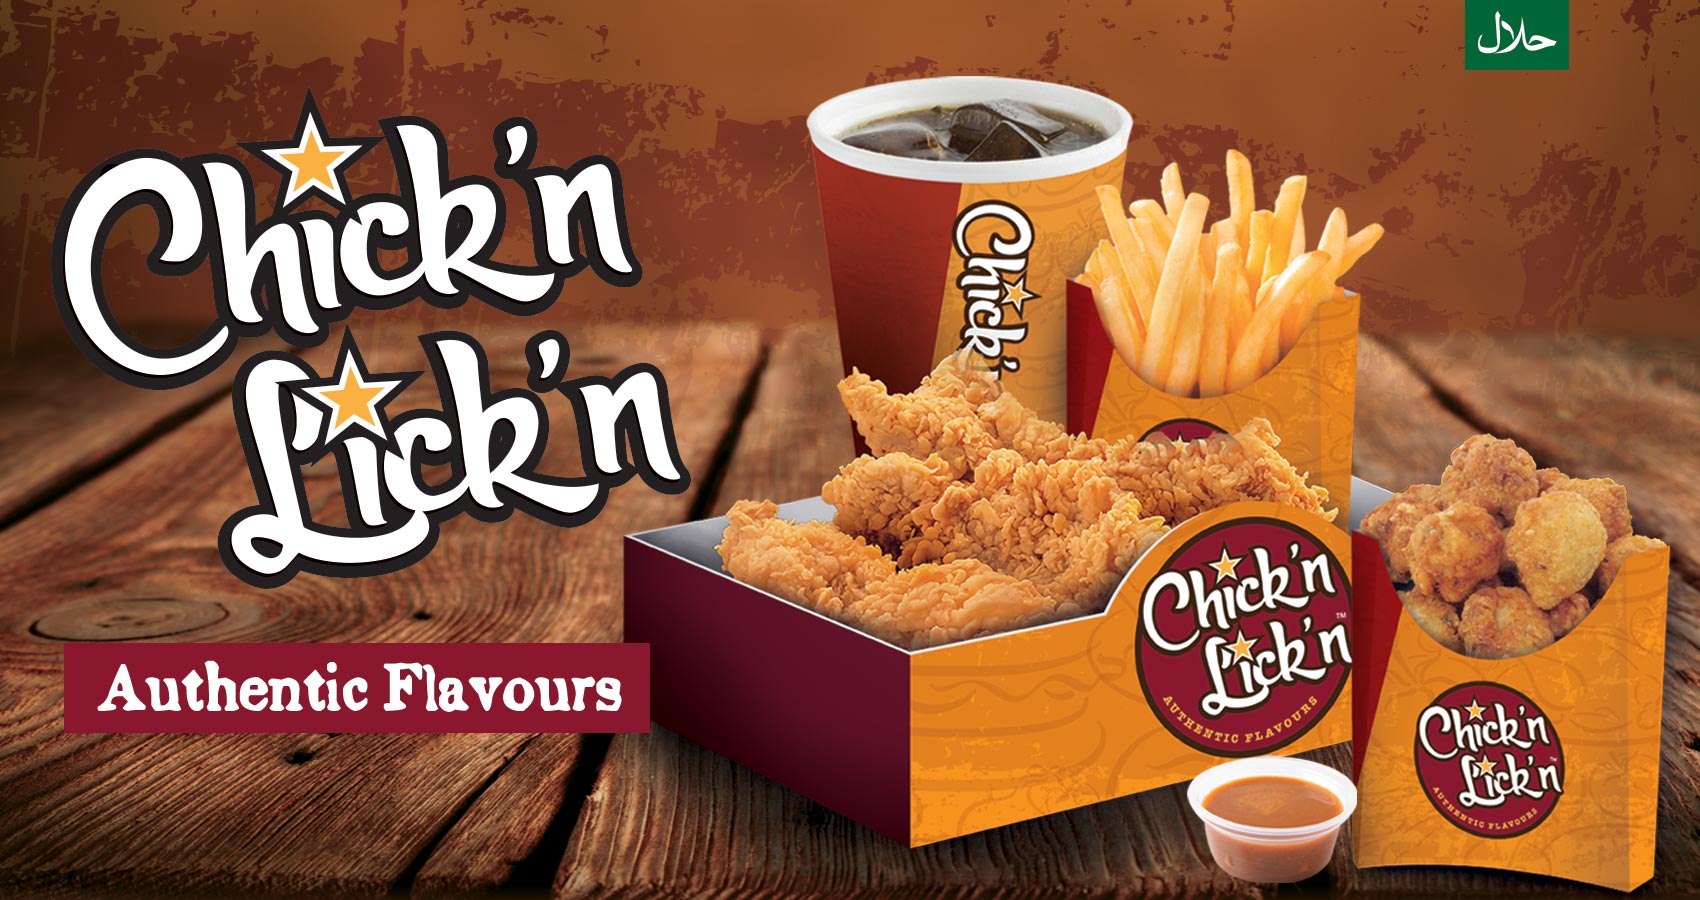 ChicknLickn - Authentic Flavours